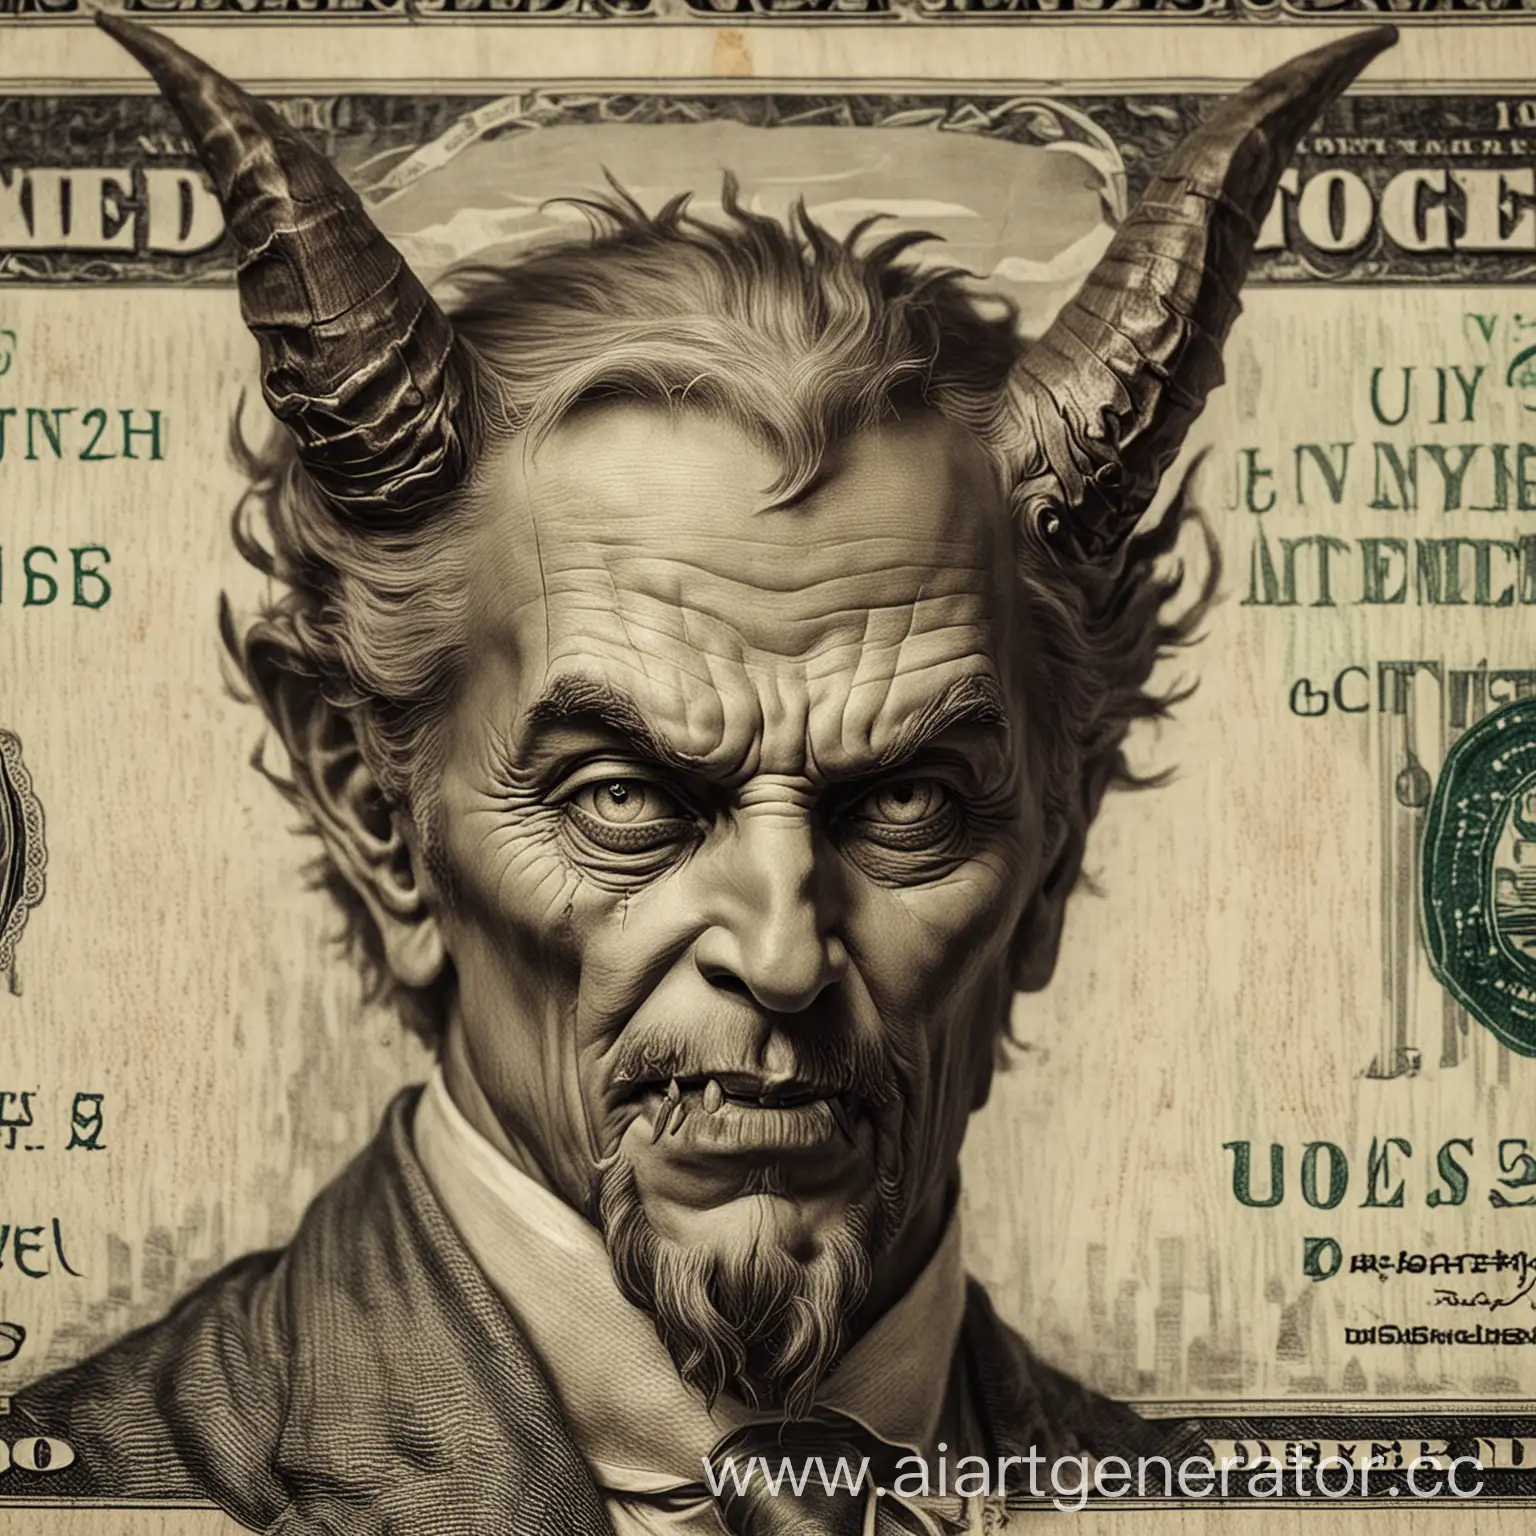 The image of the devil on the US dollar